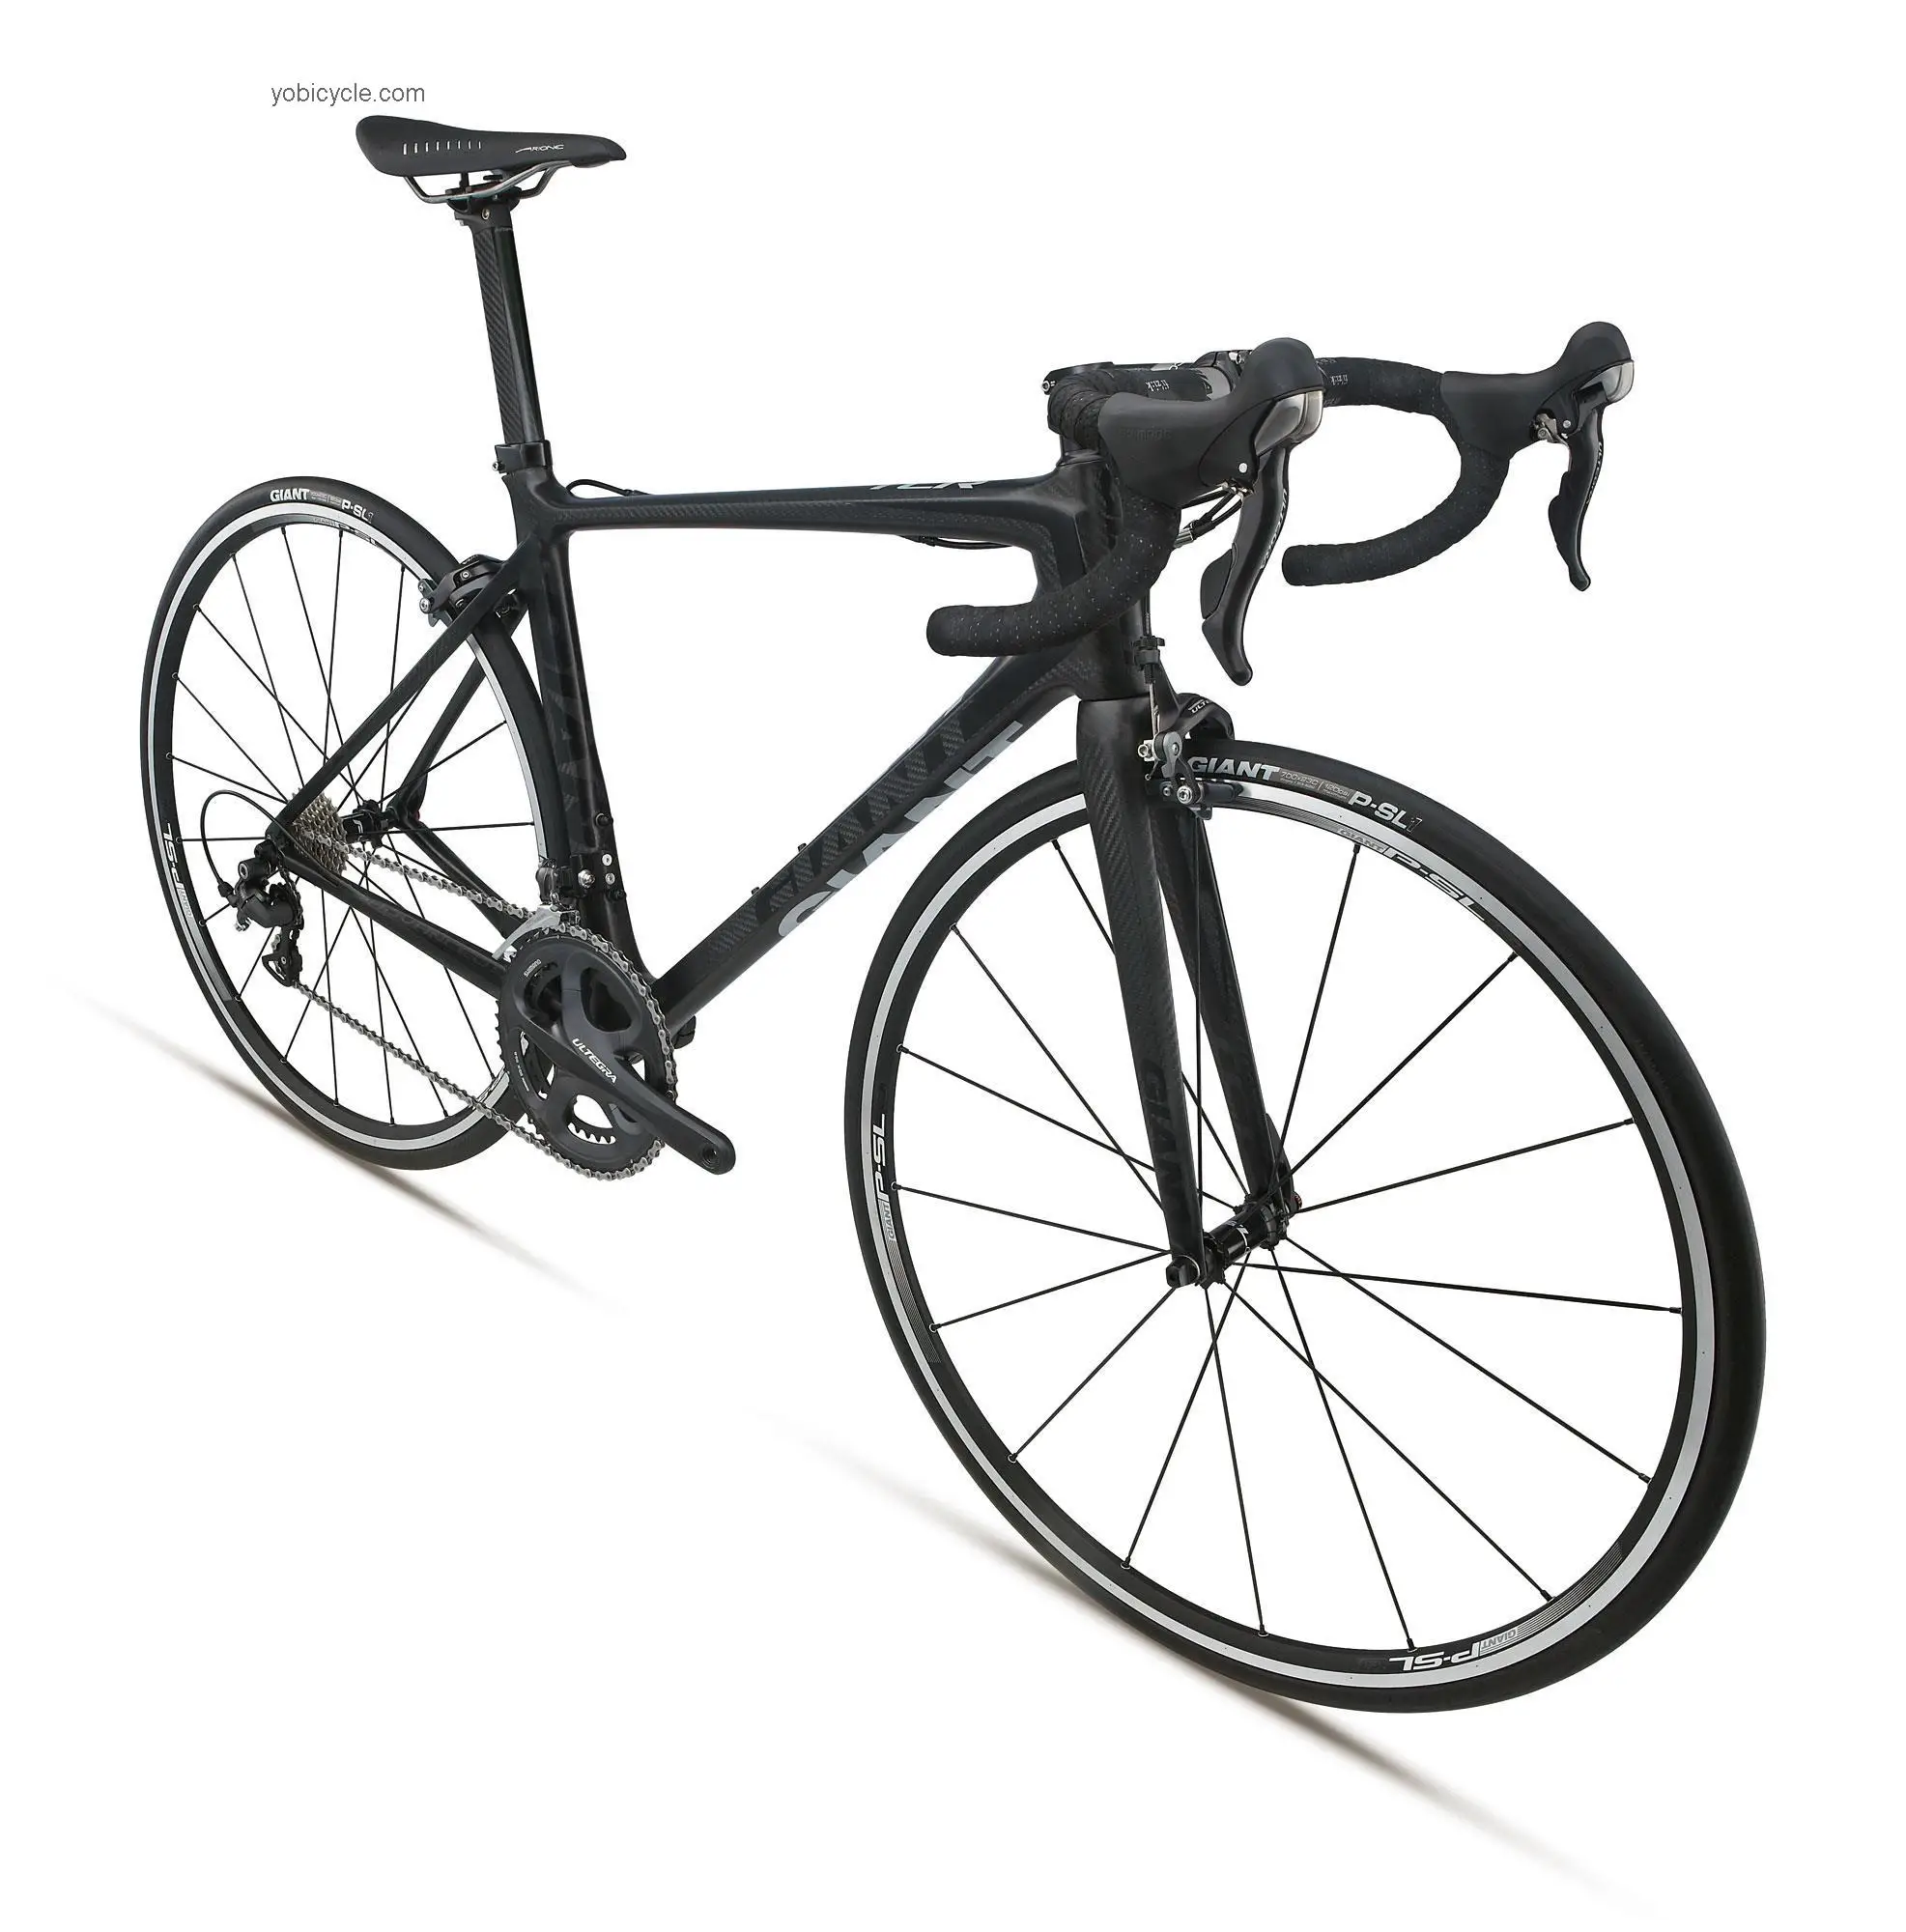 Giant TCR Advanced SL 3 Double 2012 comparison online with competitors